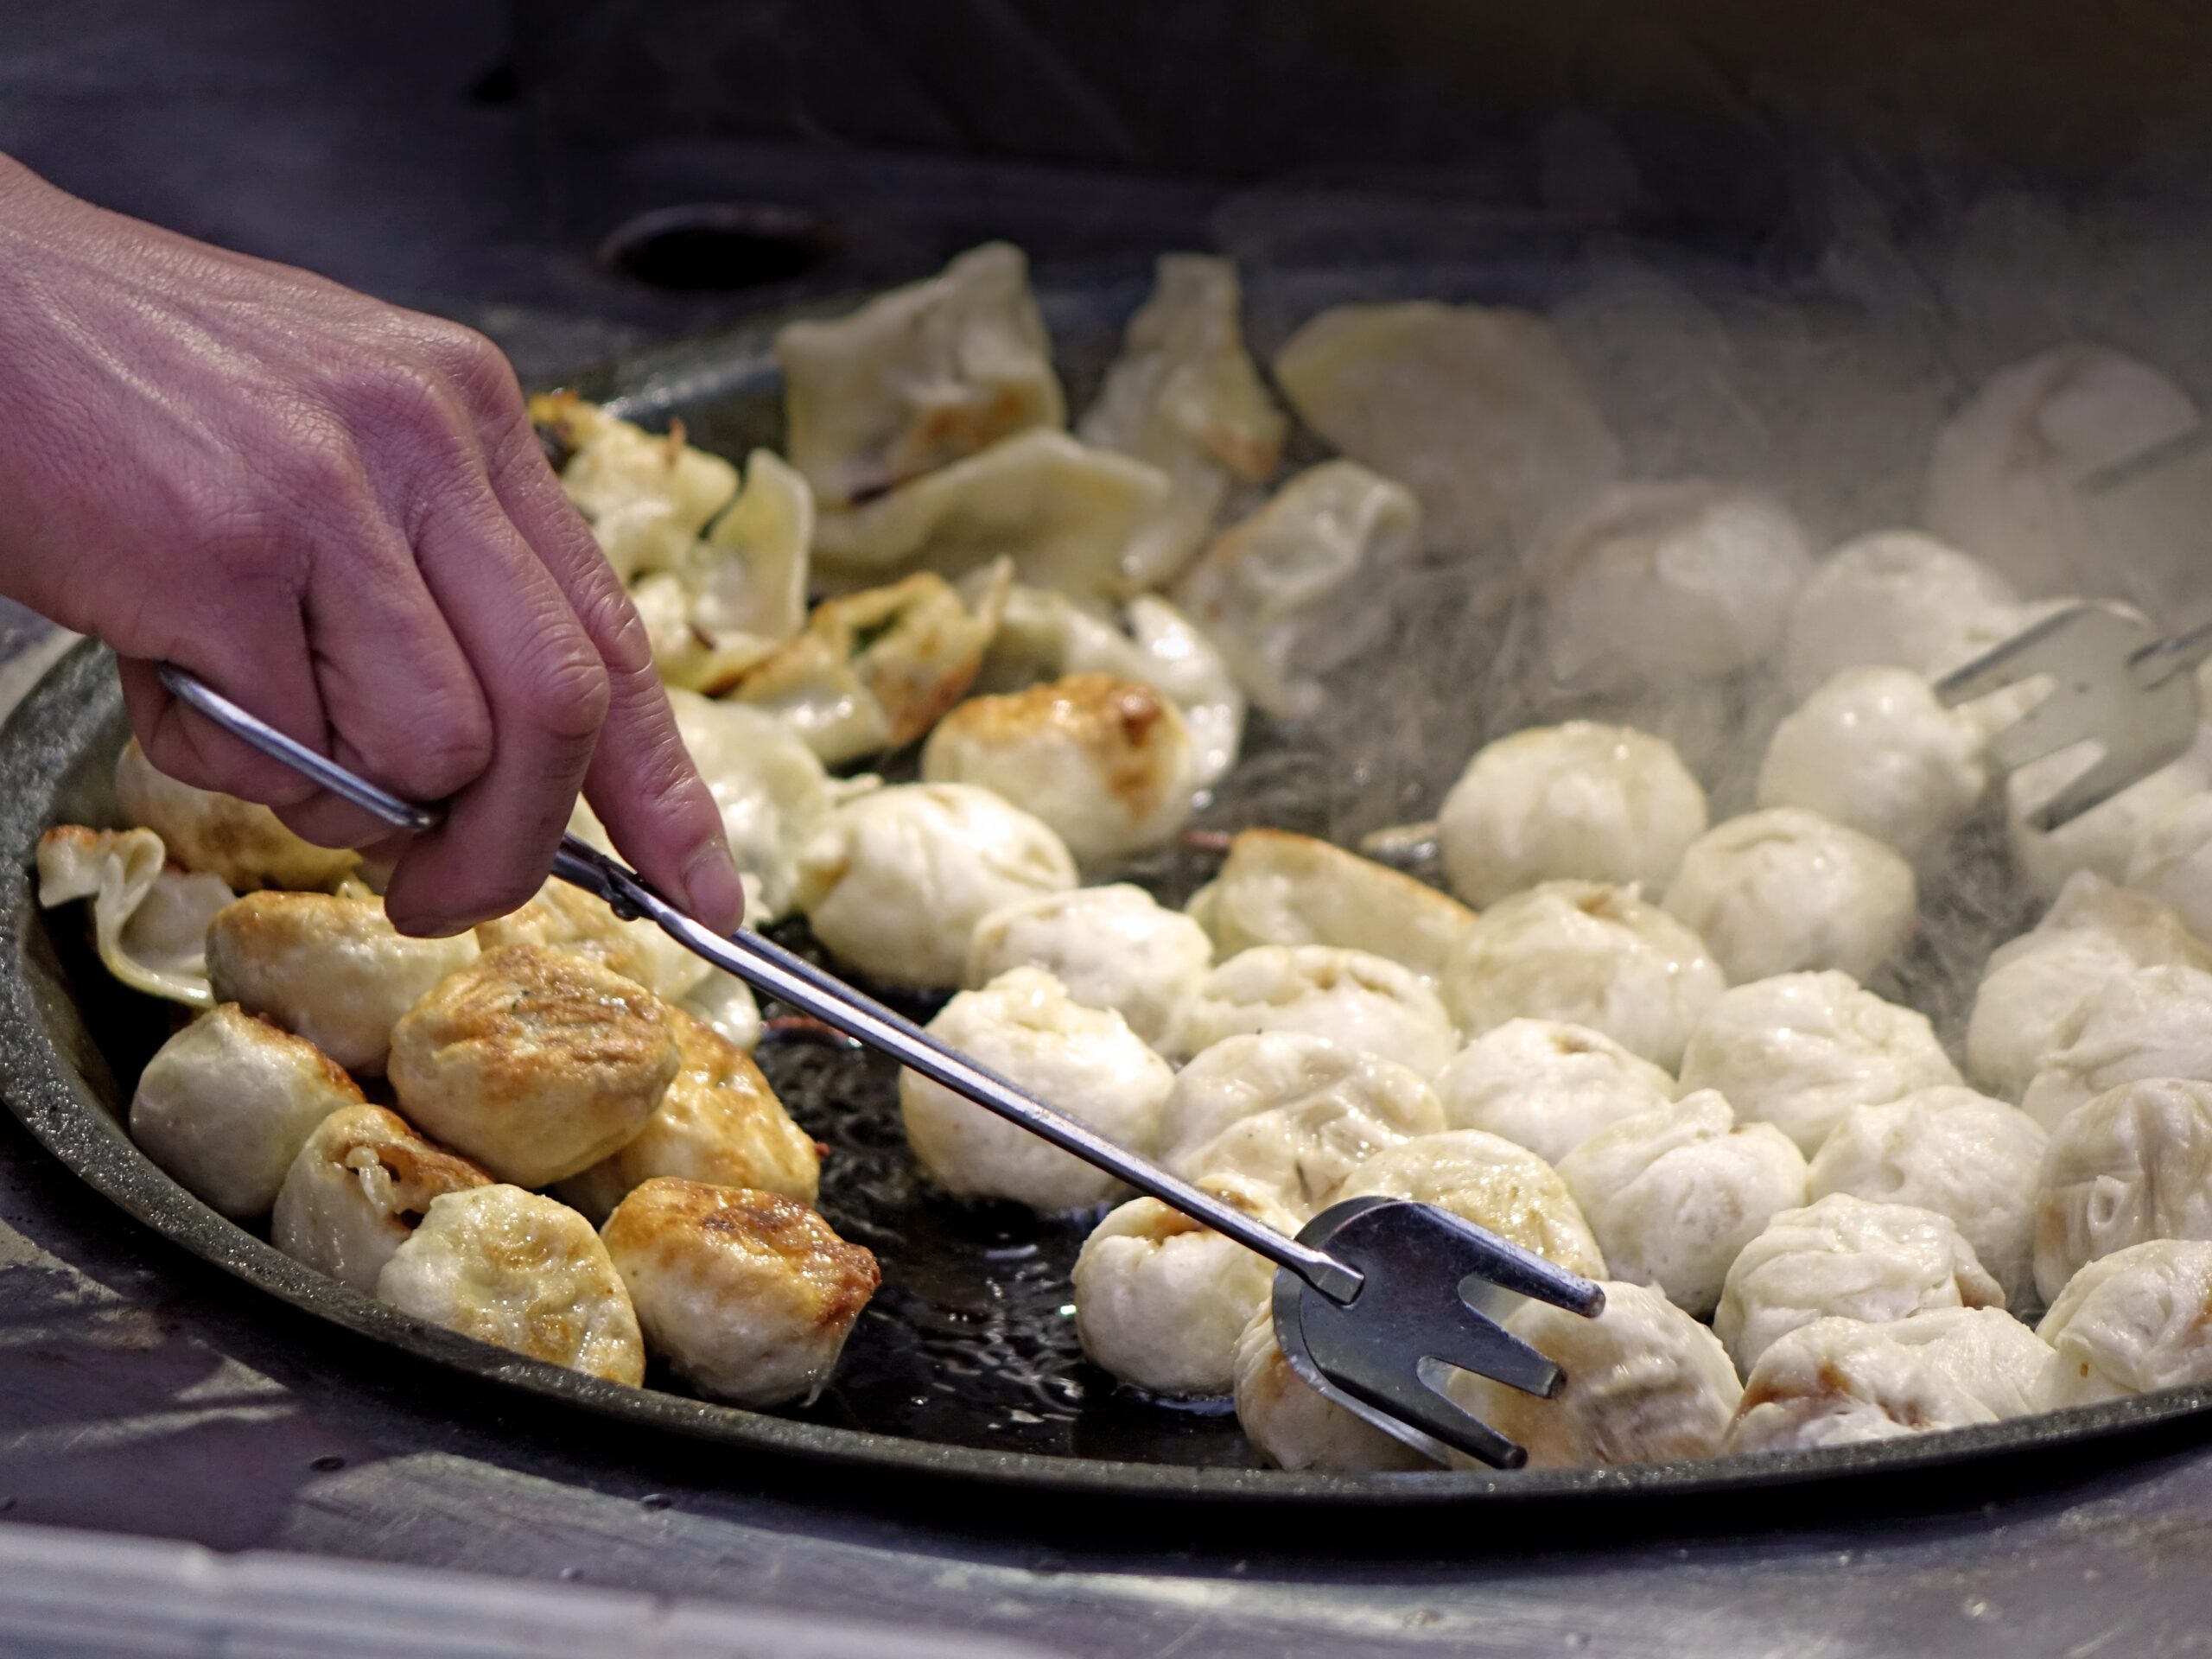 Chinese dumplings being steamed in a large iron skillet with steam and oil